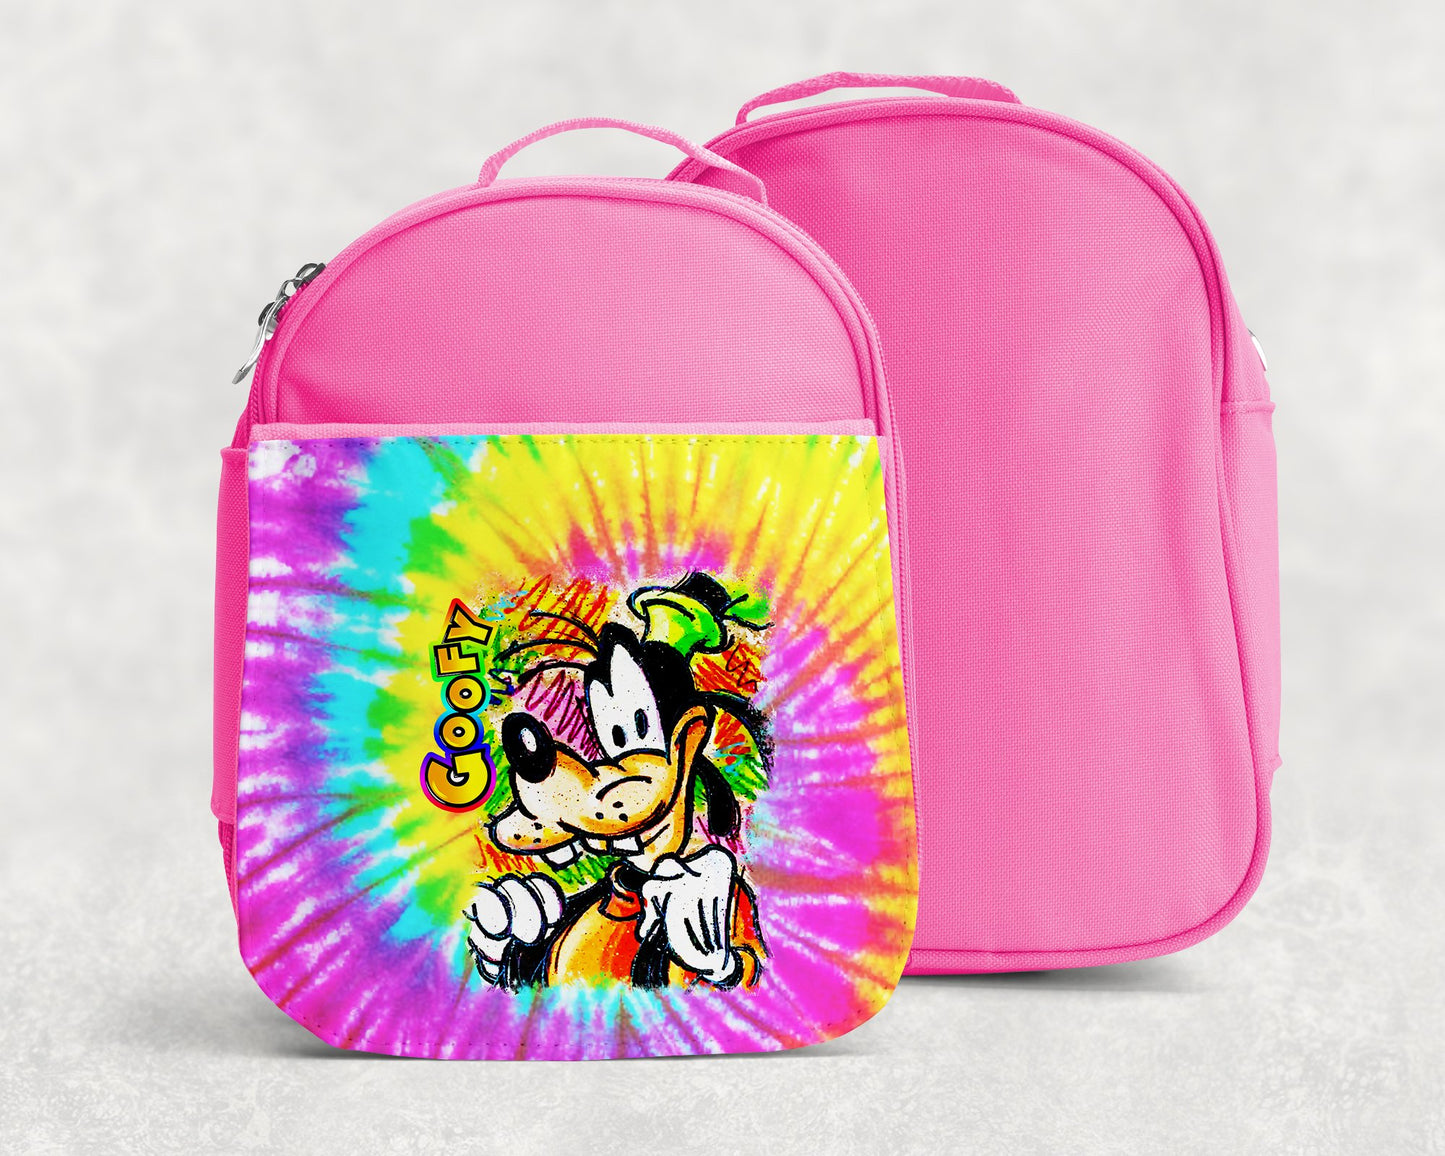 Goofy Lunch Tote